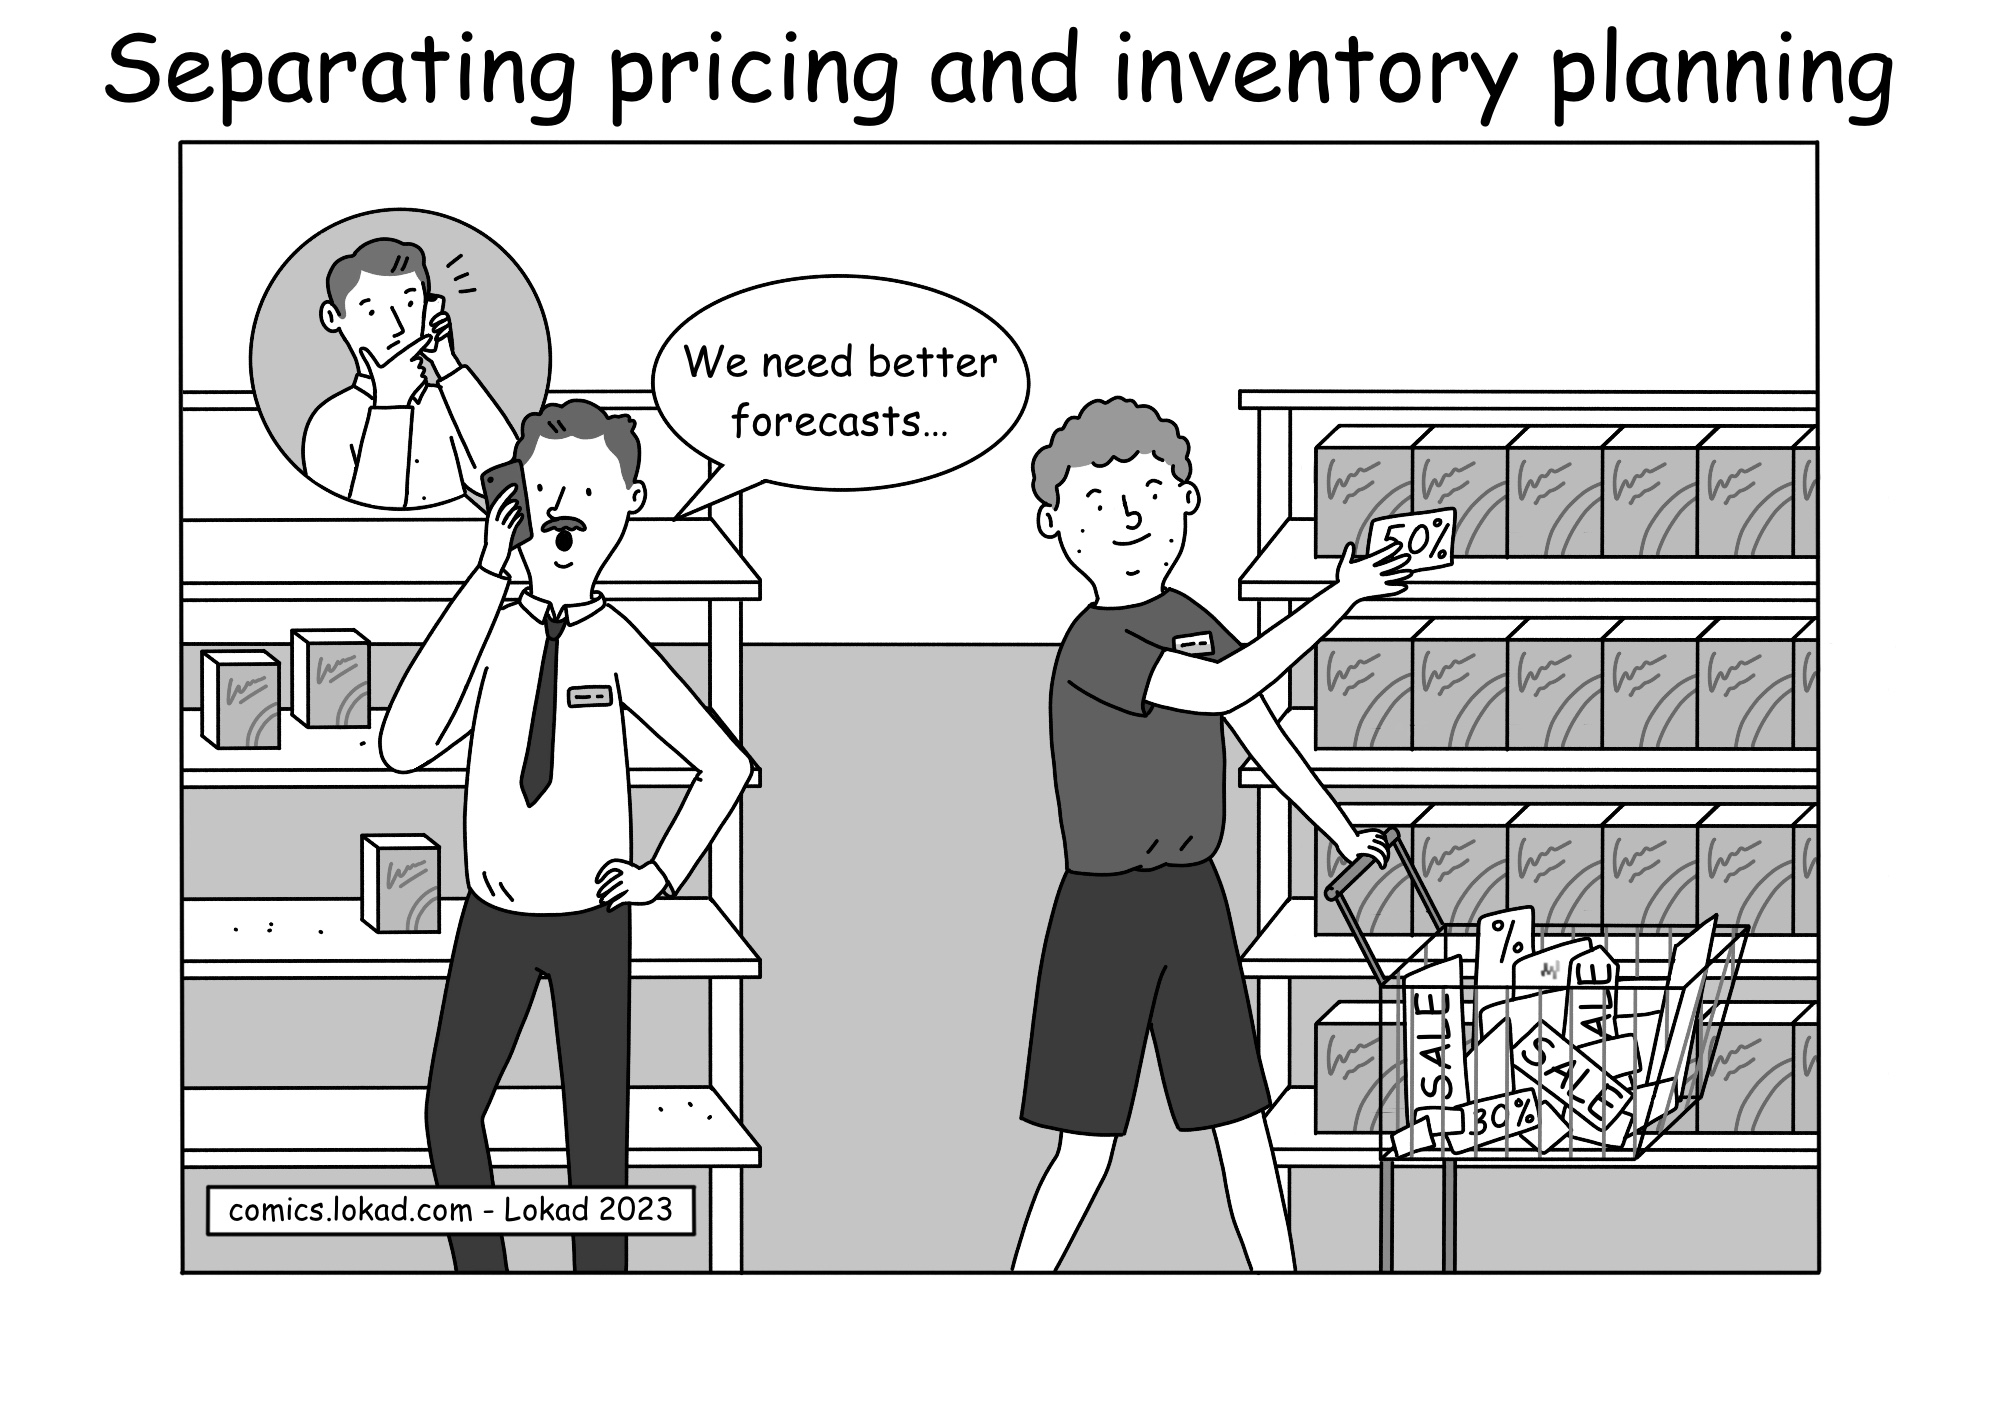 Separating pricing and inventory planning